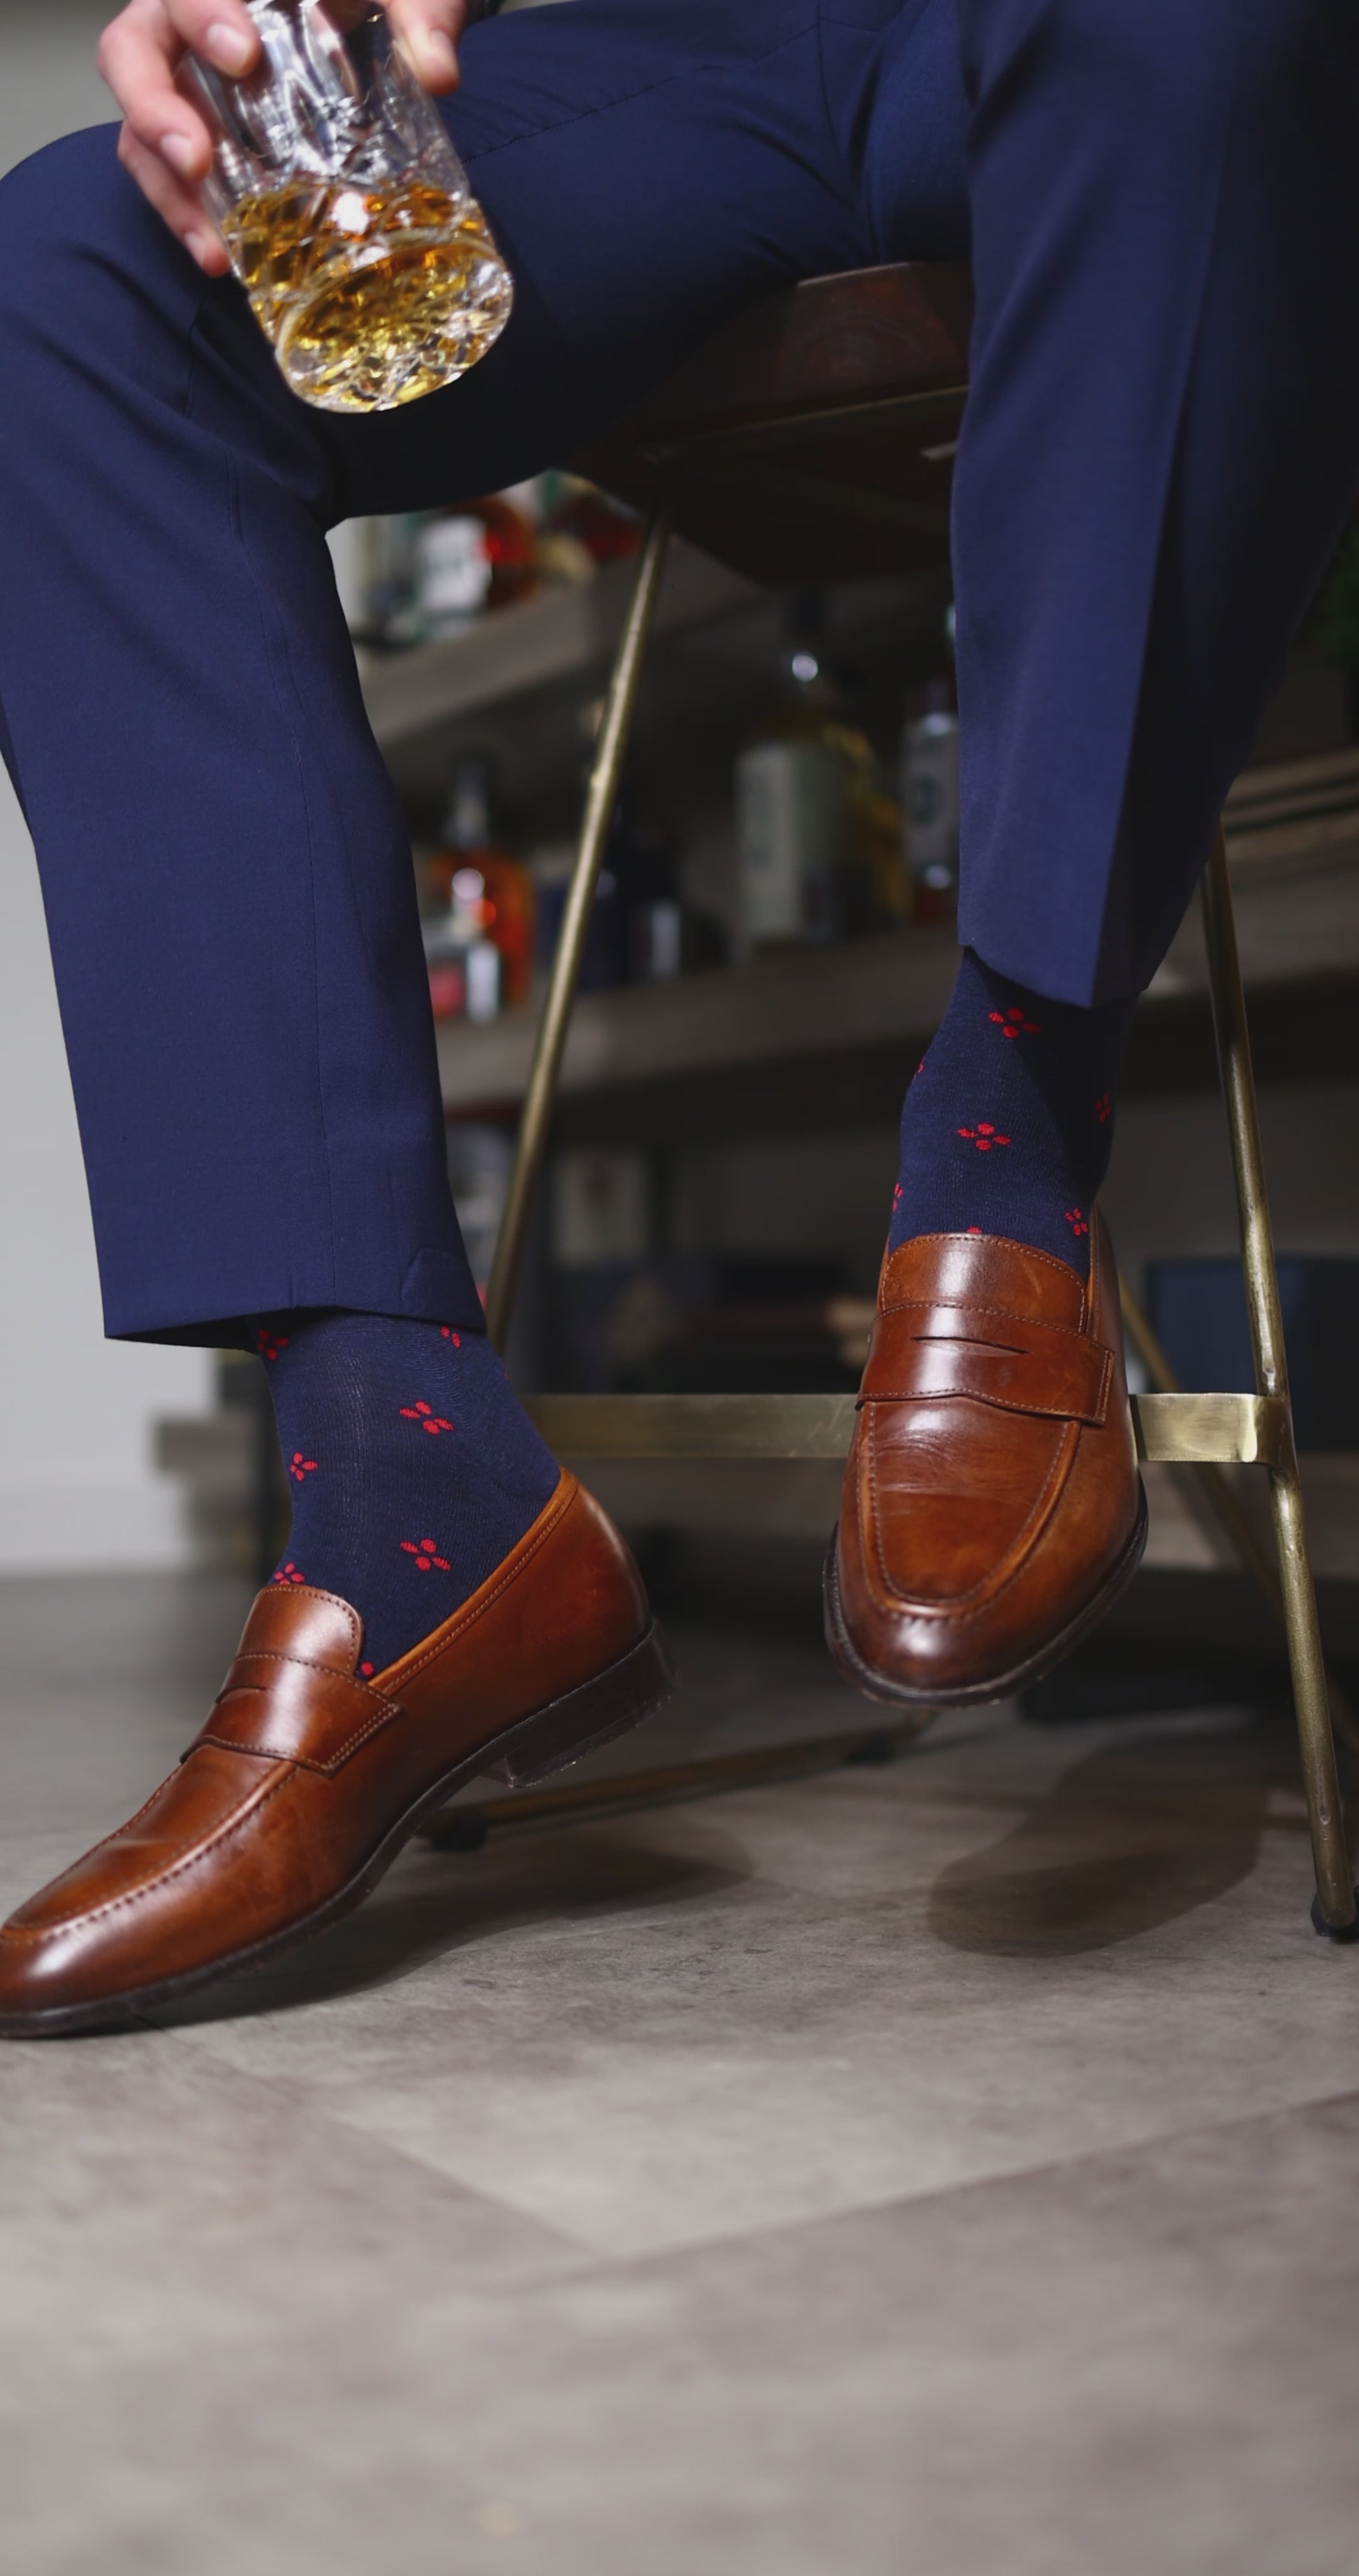 Navy blue men's sock with a cherry red flower pattern